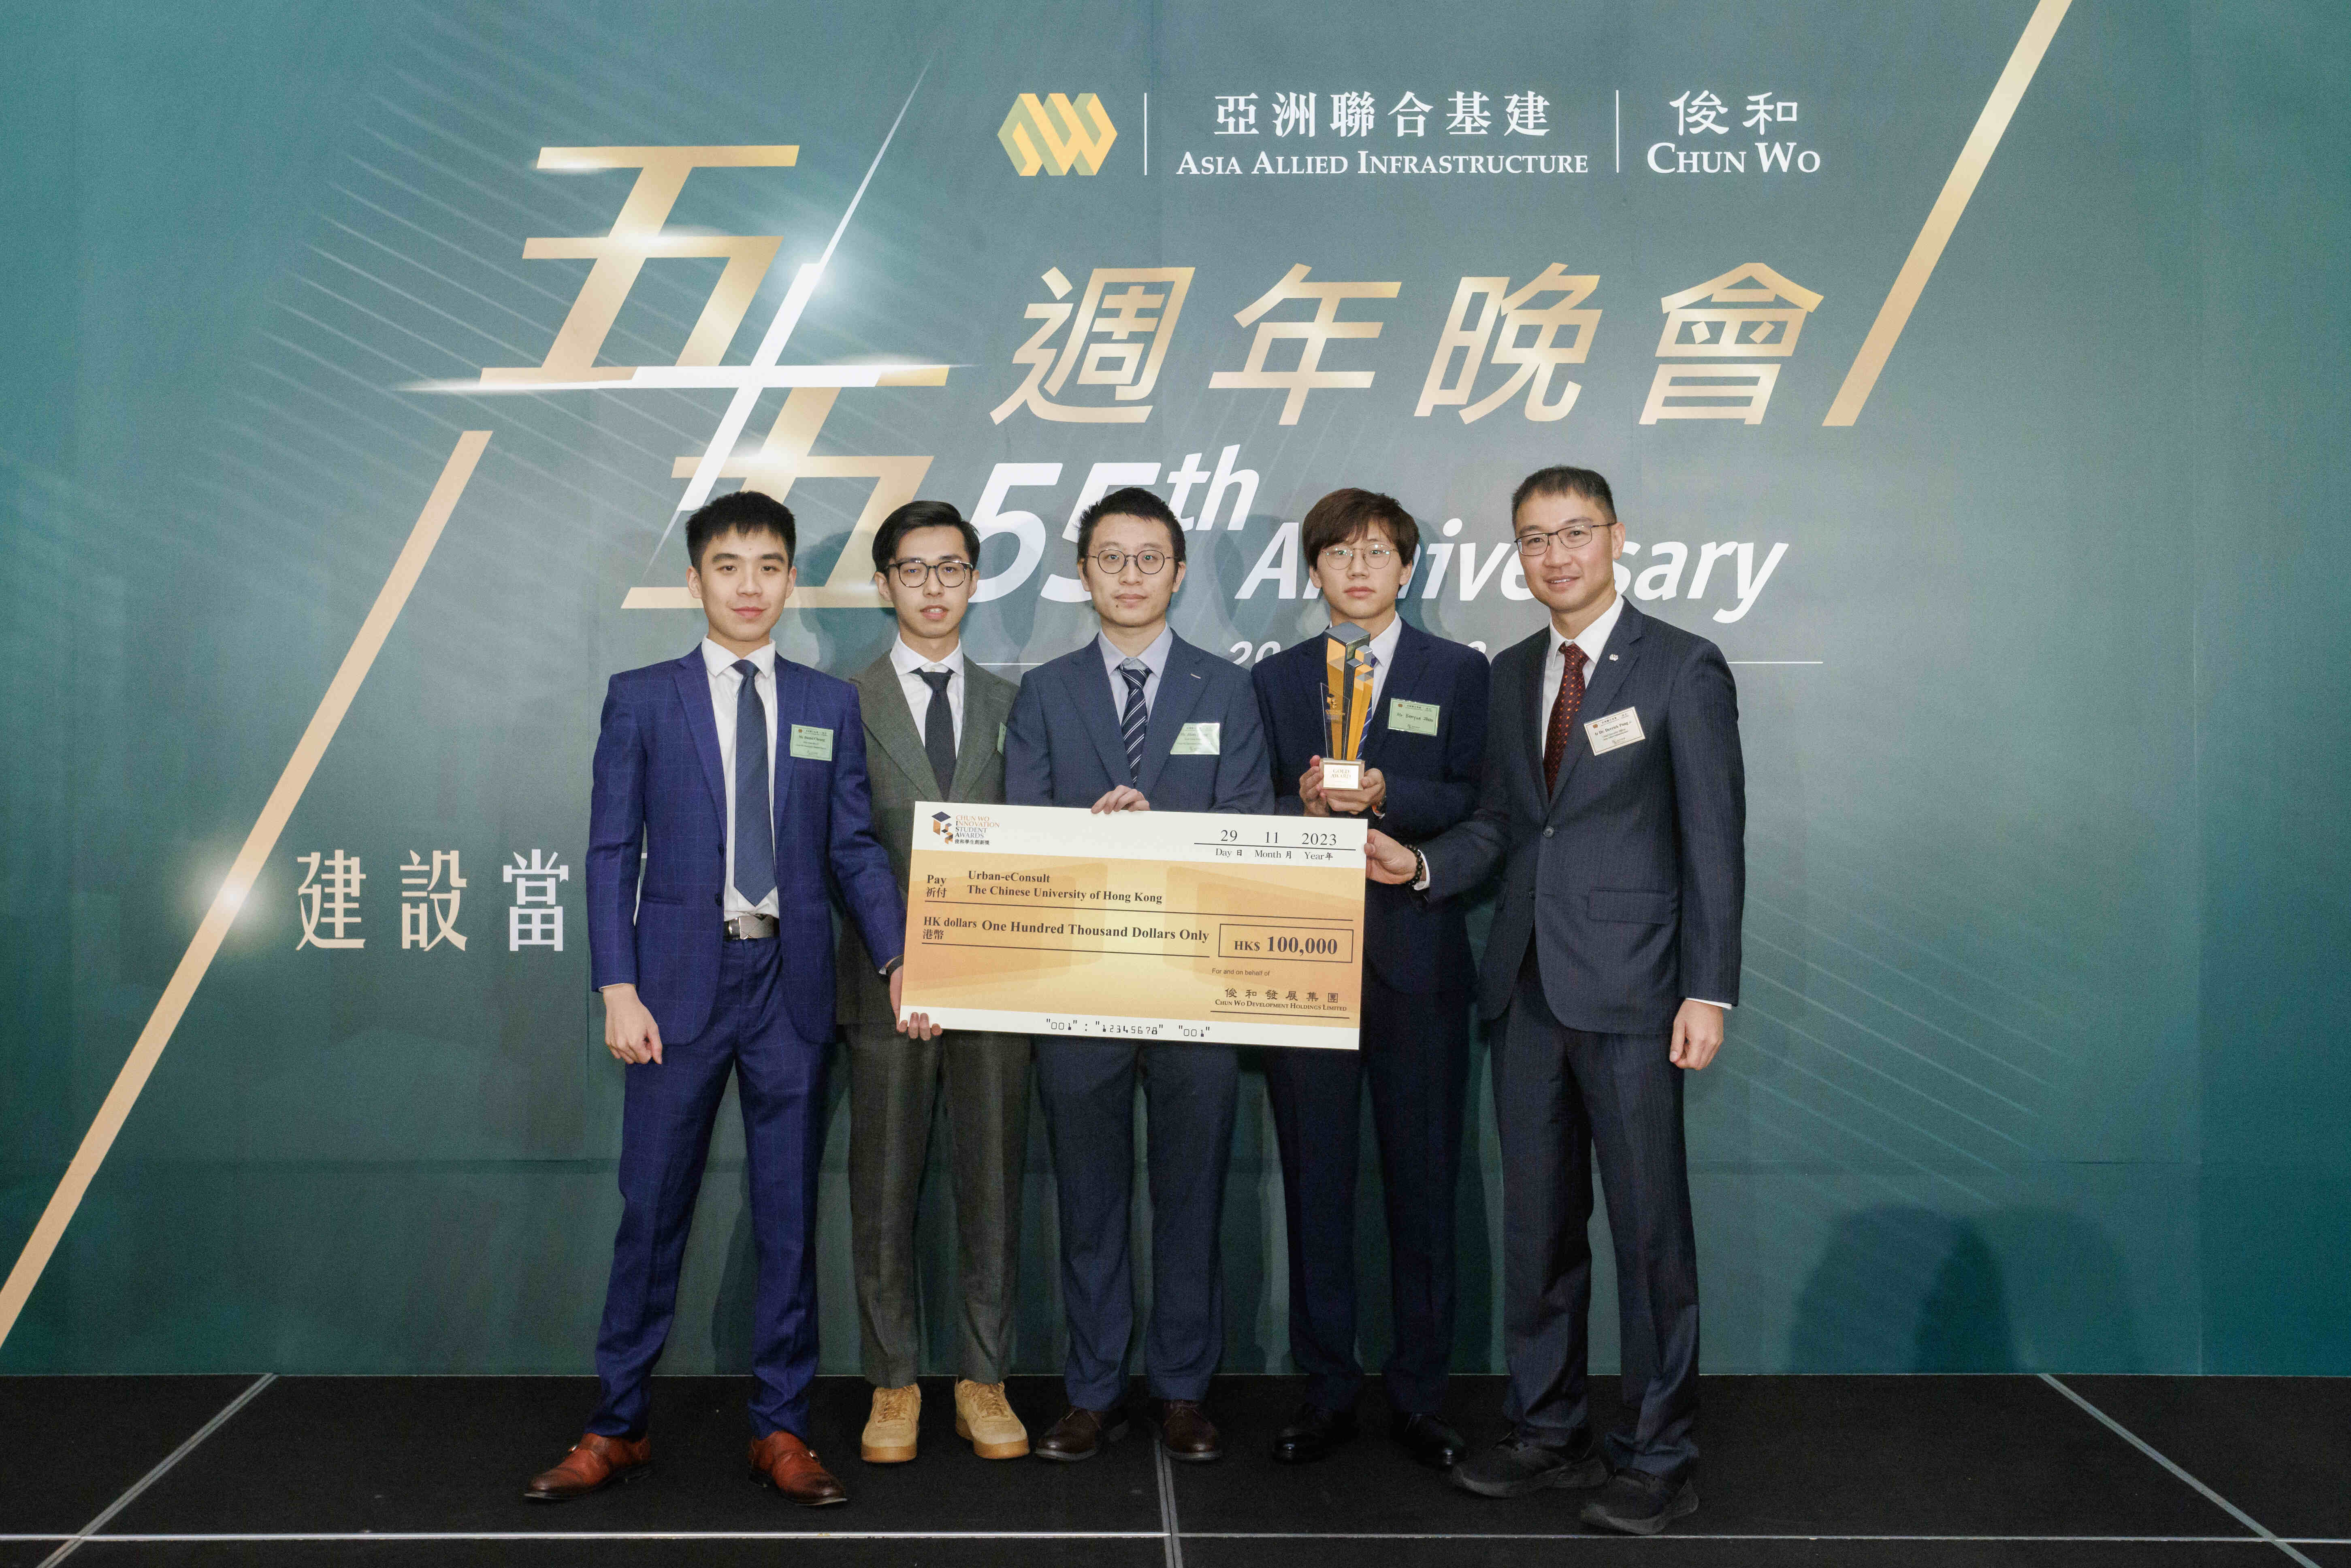 Ir Dr. Derrick Pang, JP, Chief Executive Office of Asia Allied Infrastructure, presented the CWSIA gold award to the winner from The Chinese University of Hong Kong for their automated application for urban planning and building inspection named 